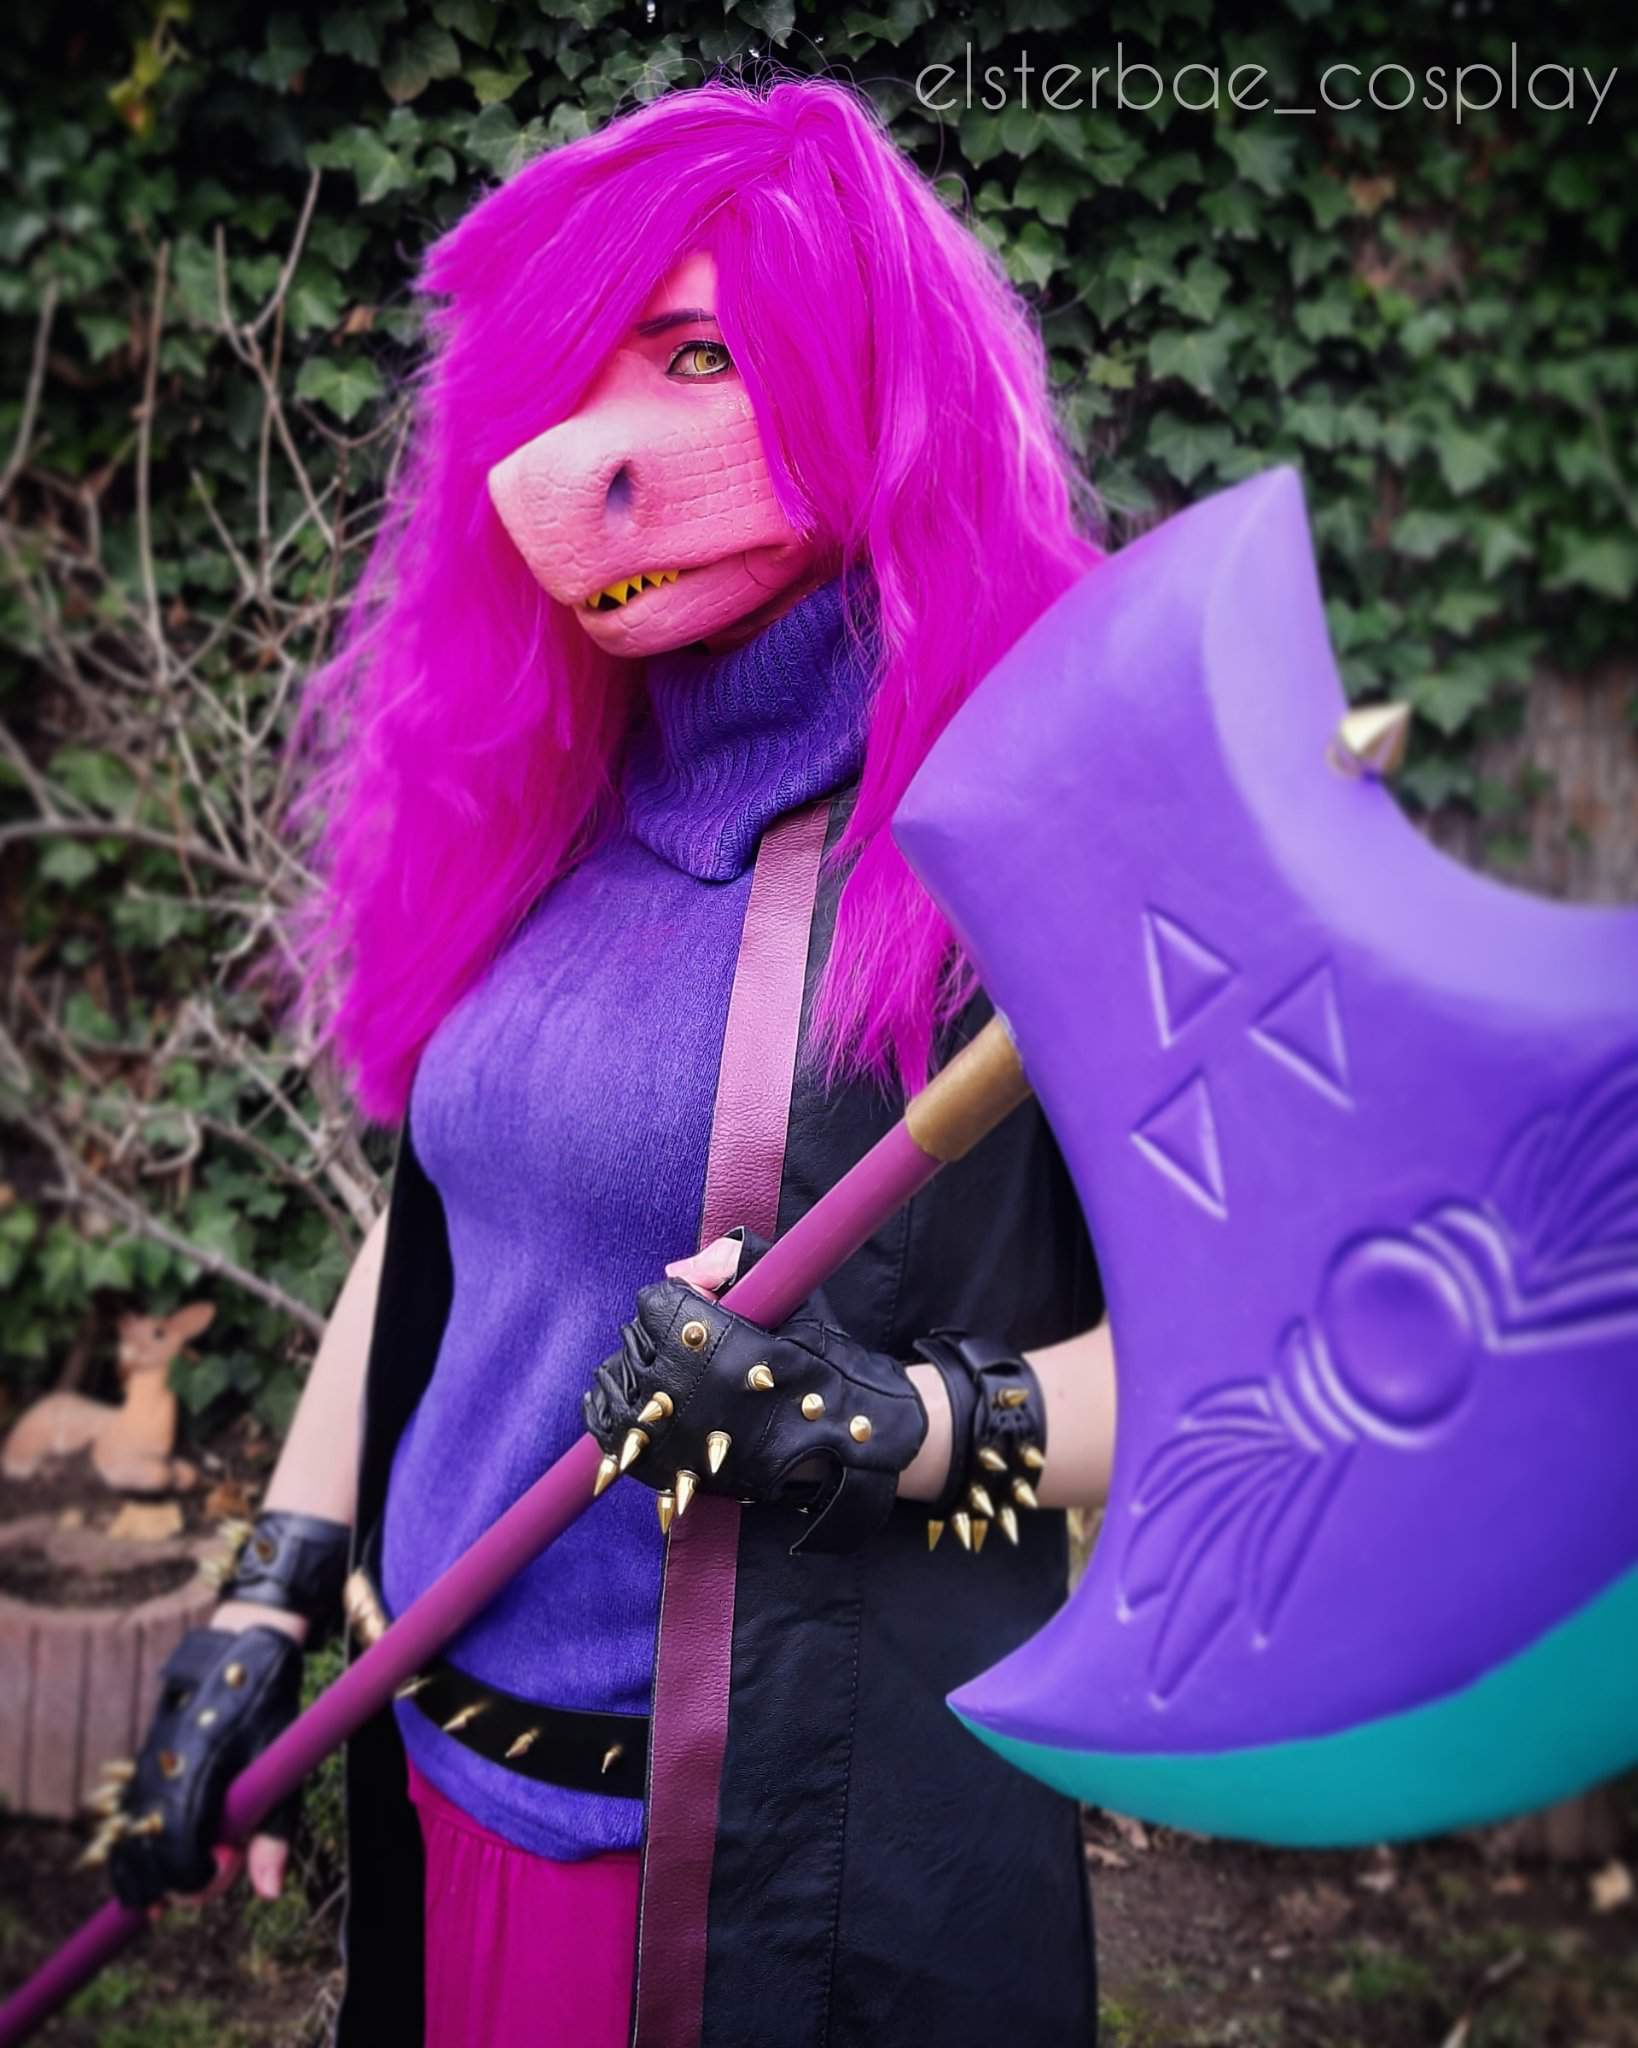 My Susie Cosplay! 